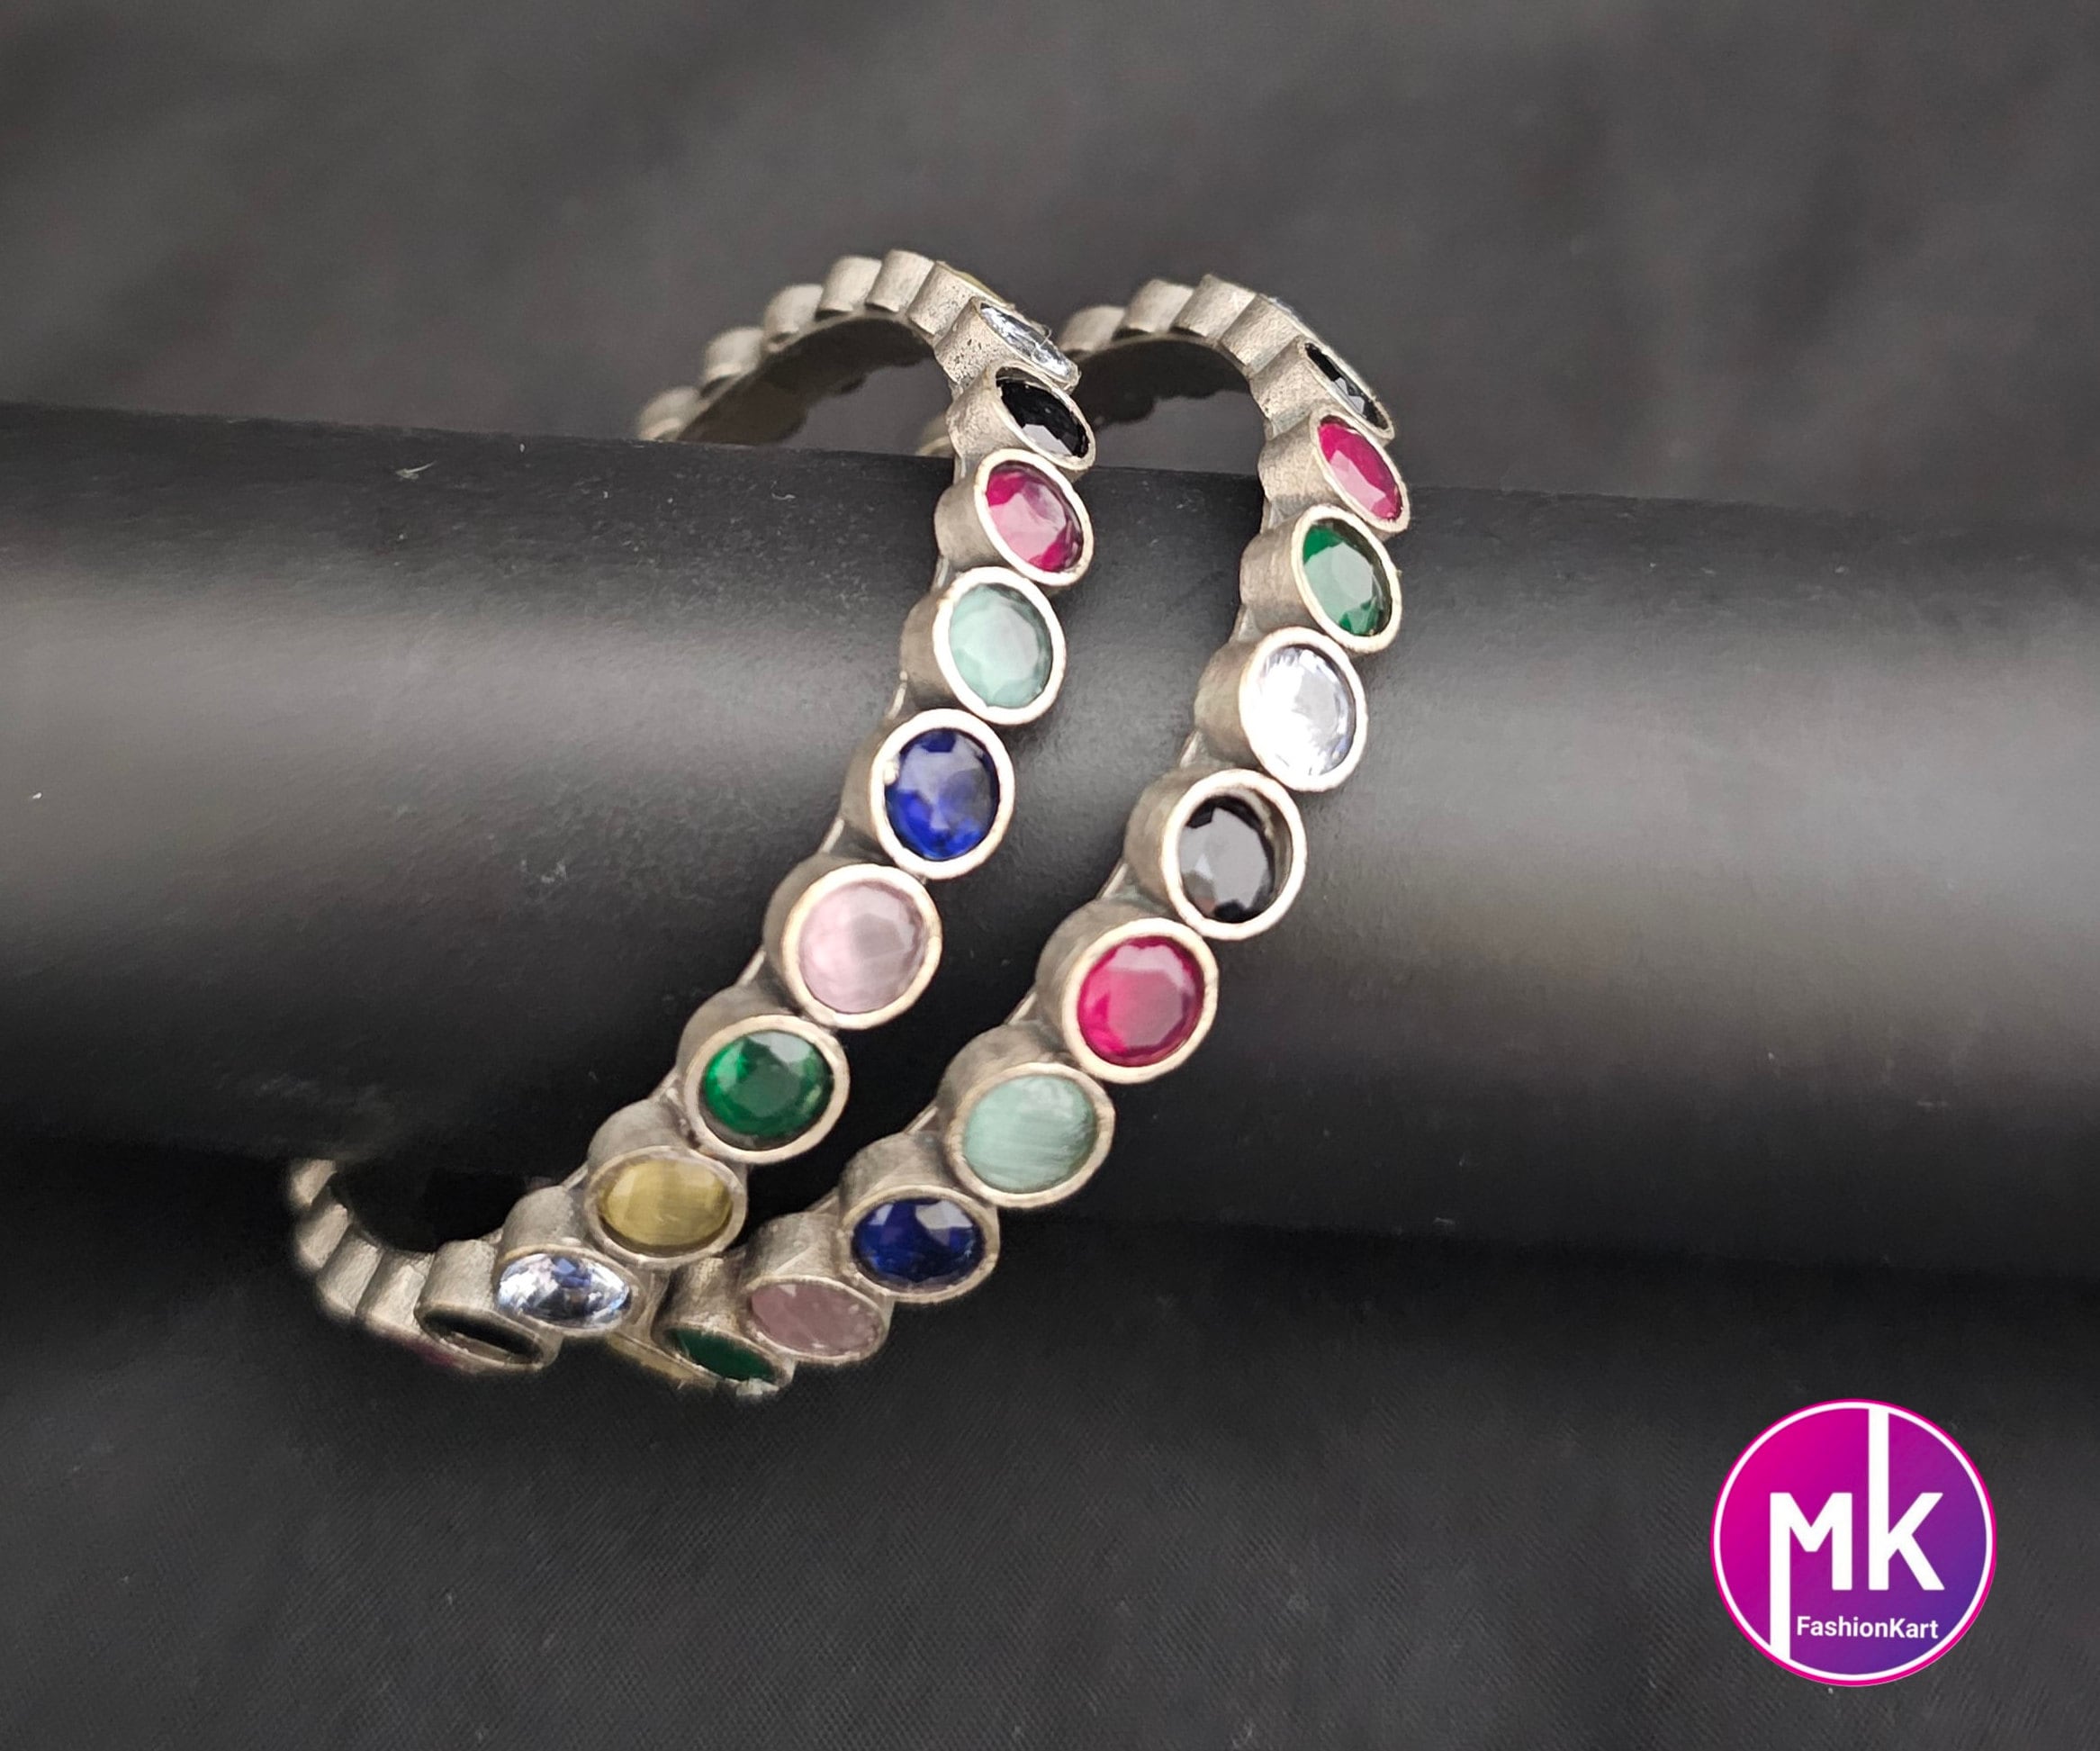 Oxidized Bangles with multi-color stones - Set of 2 Bangles - Size 2.6